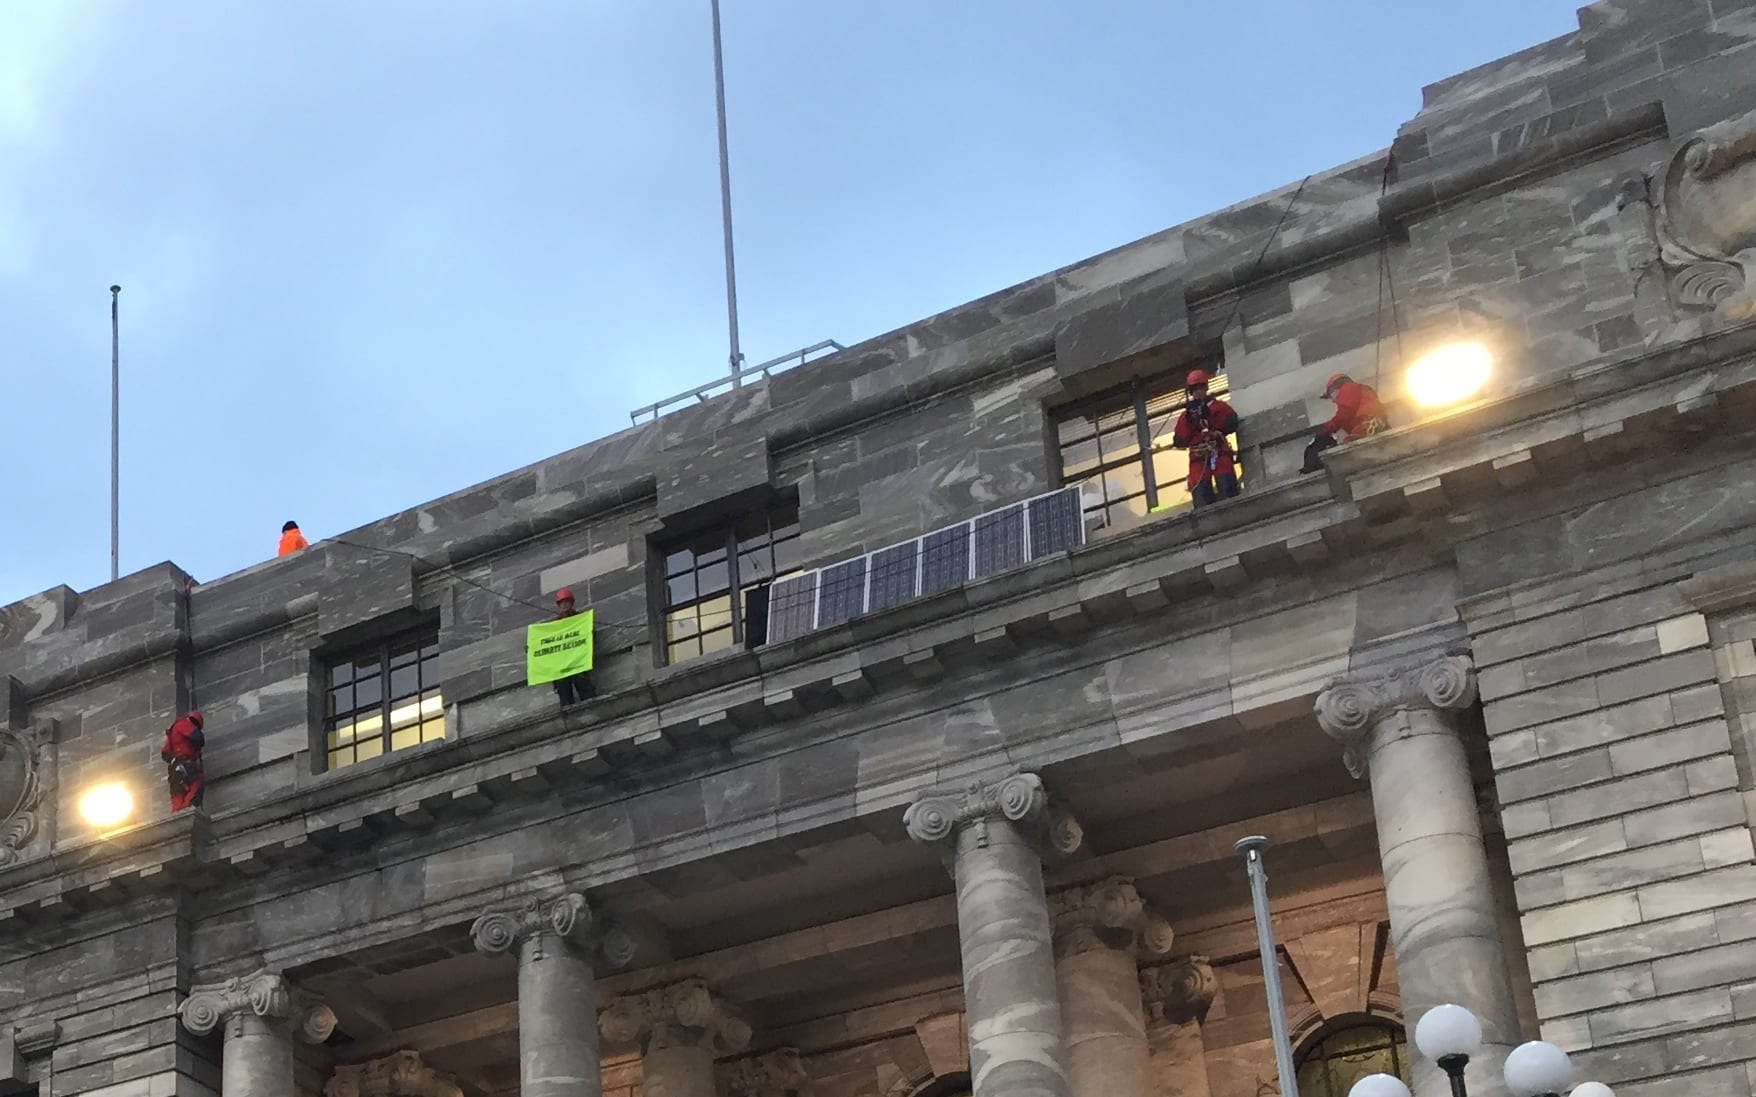 Protesters took solar panels onto the roof of Parliament Buildings.